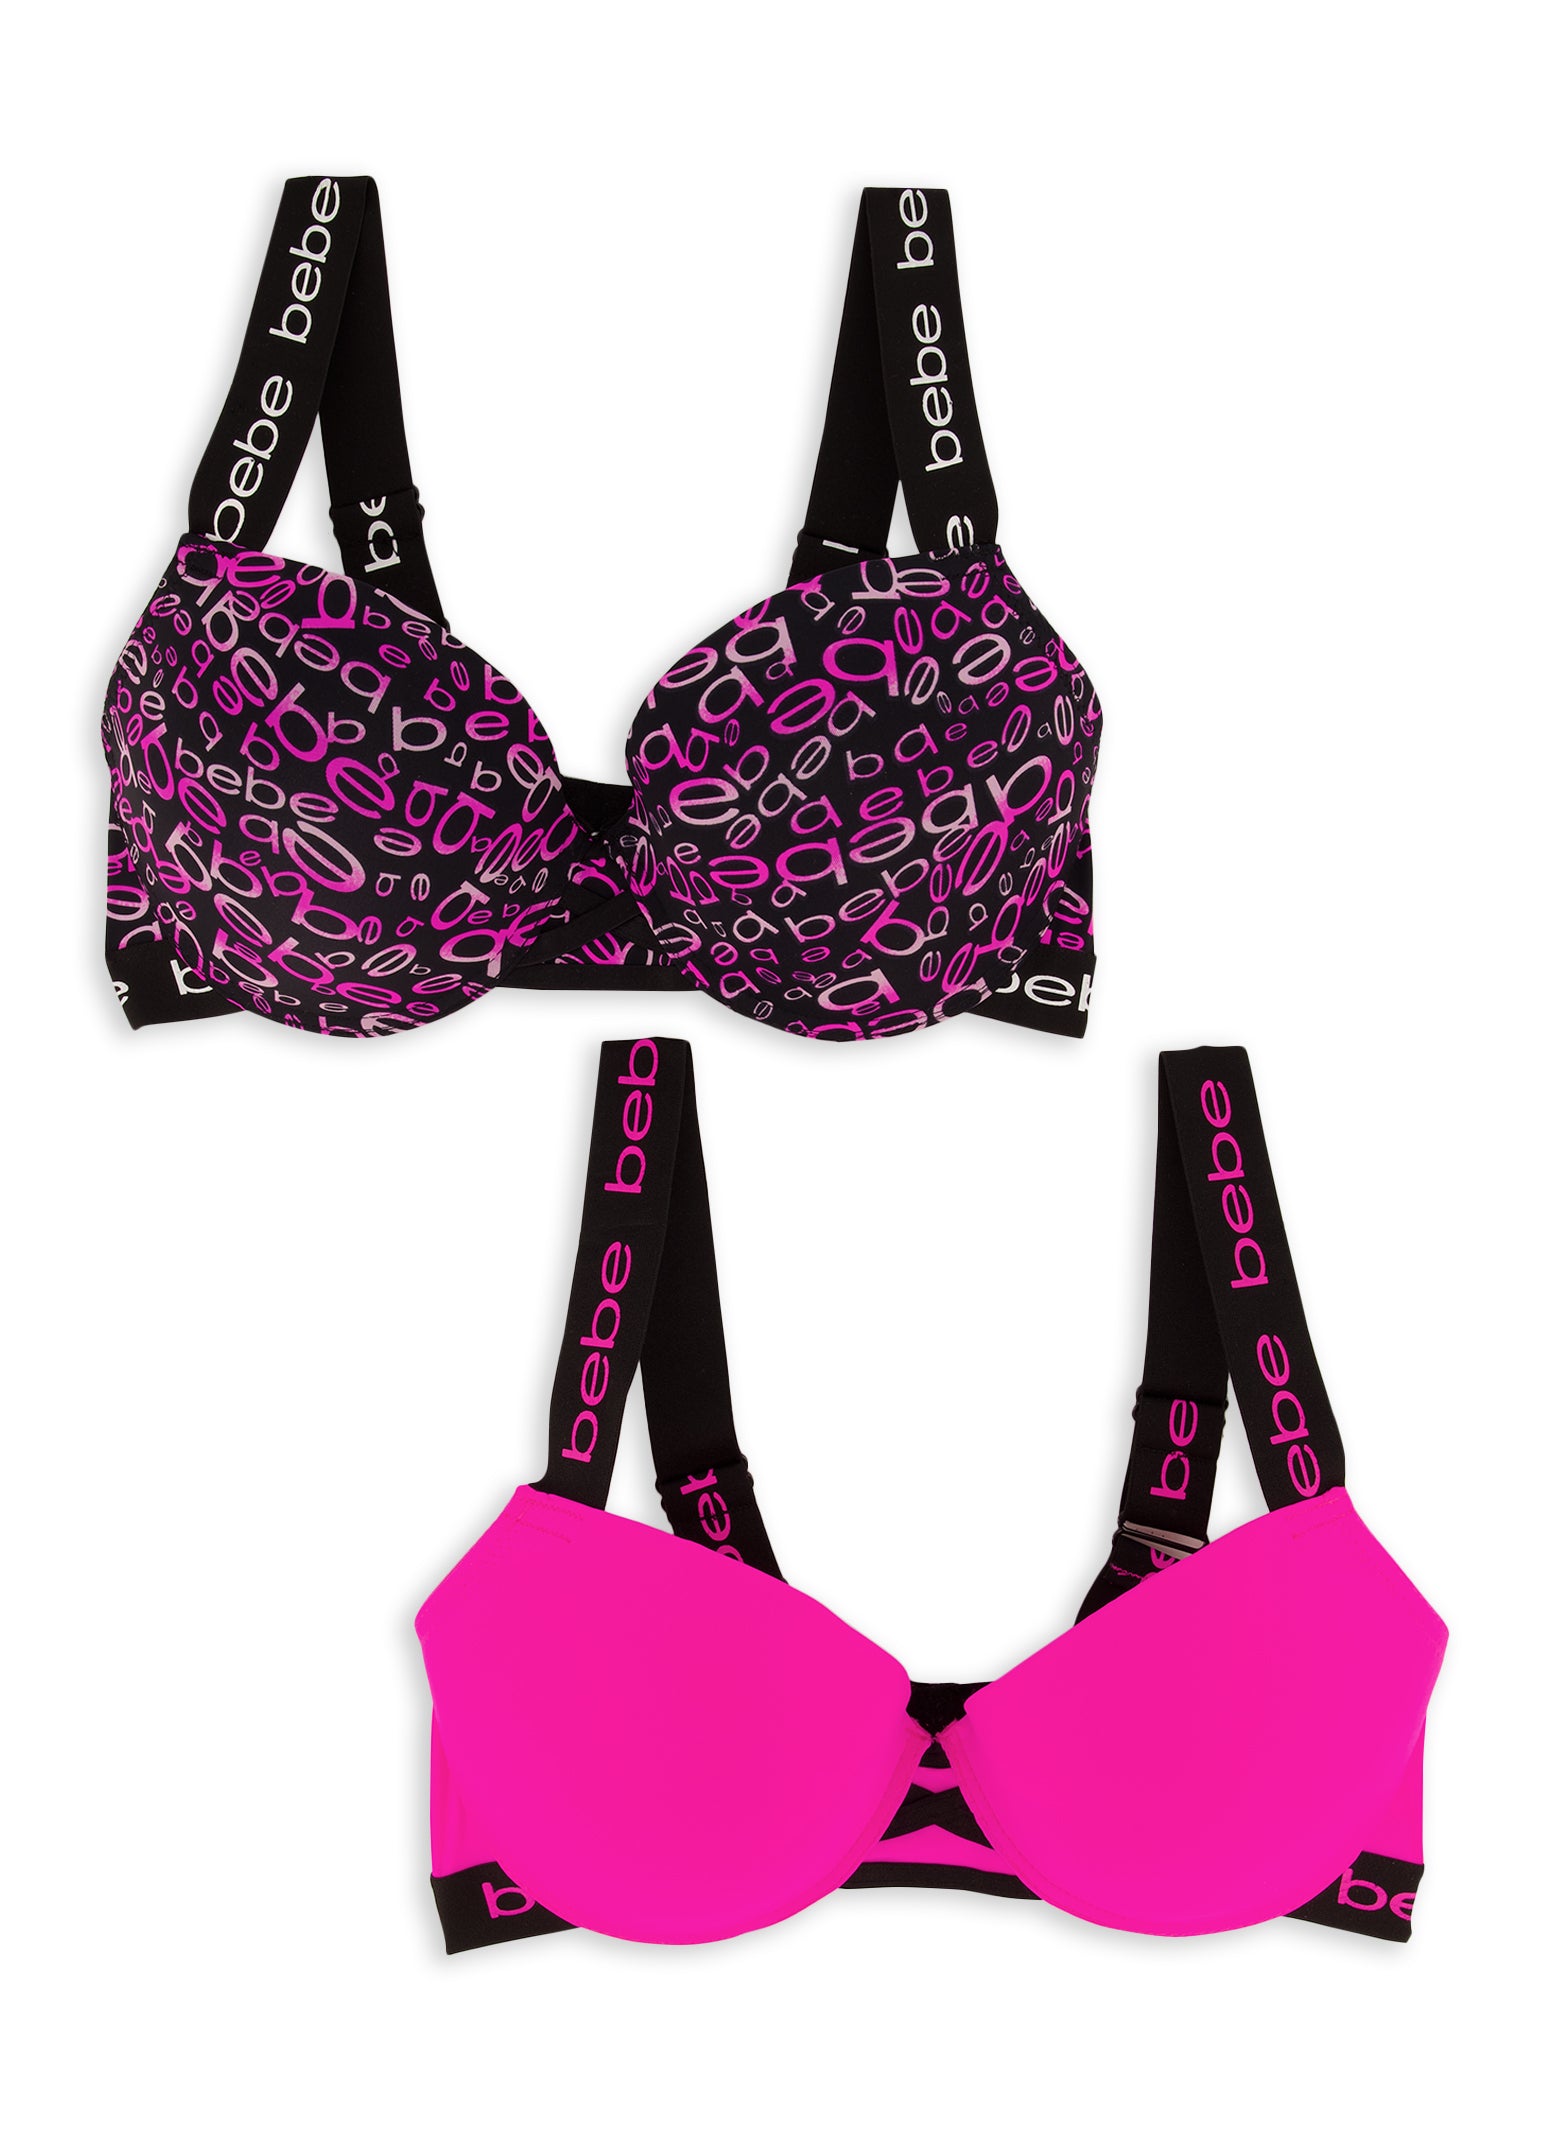 Victoria's Secret 32D Extra Small Bra sets Victoria's Secret 32D x Small  Bra Set Bundle of 2: 1 32D Push Up Bra and Extra Small Thong Pink